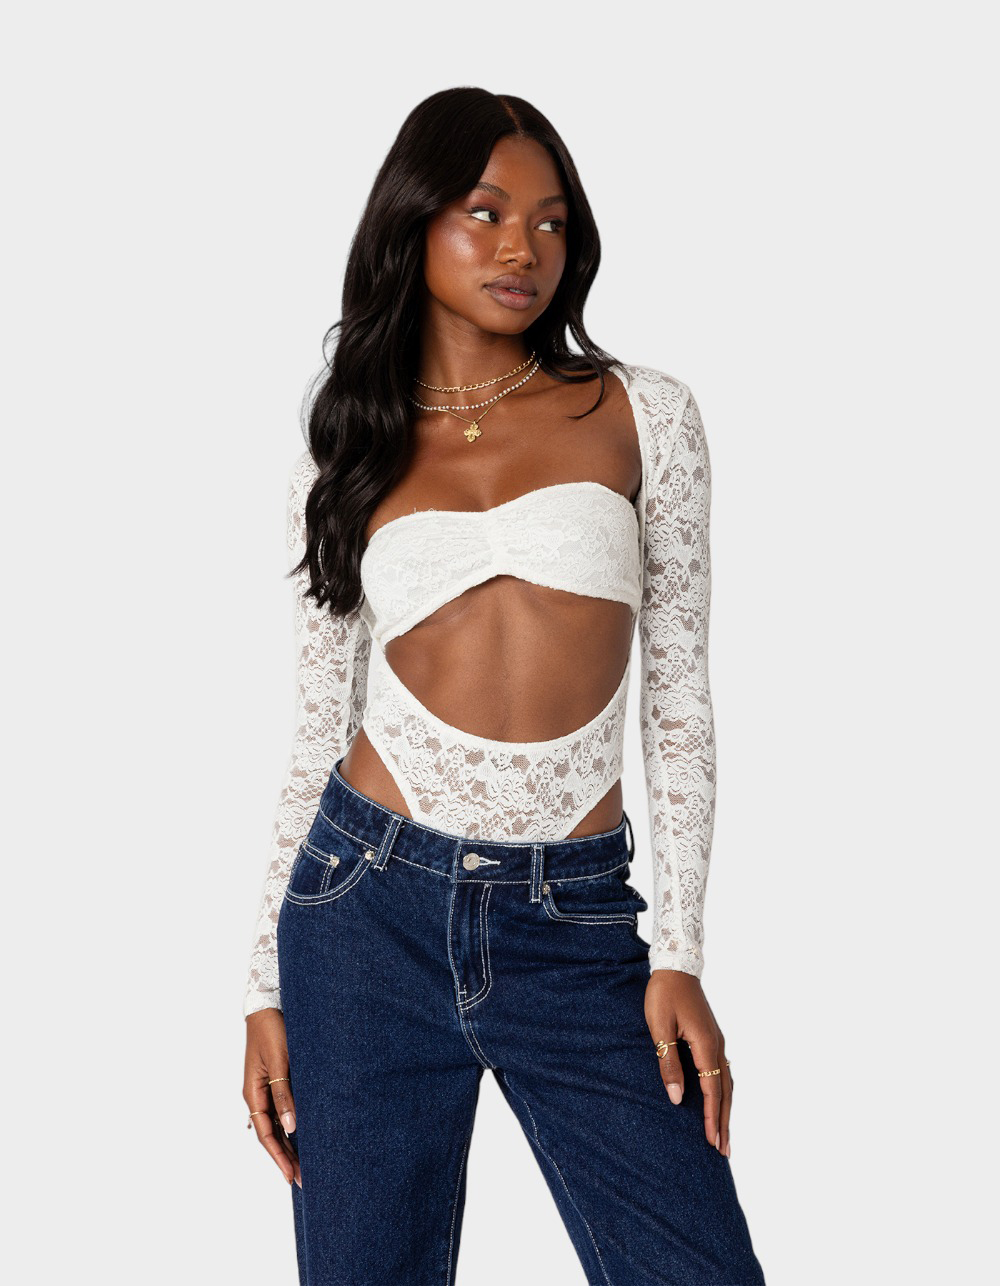 EDIKTED Zoey Sheer Lace Two Piece Womens Bodysuit - WHITE